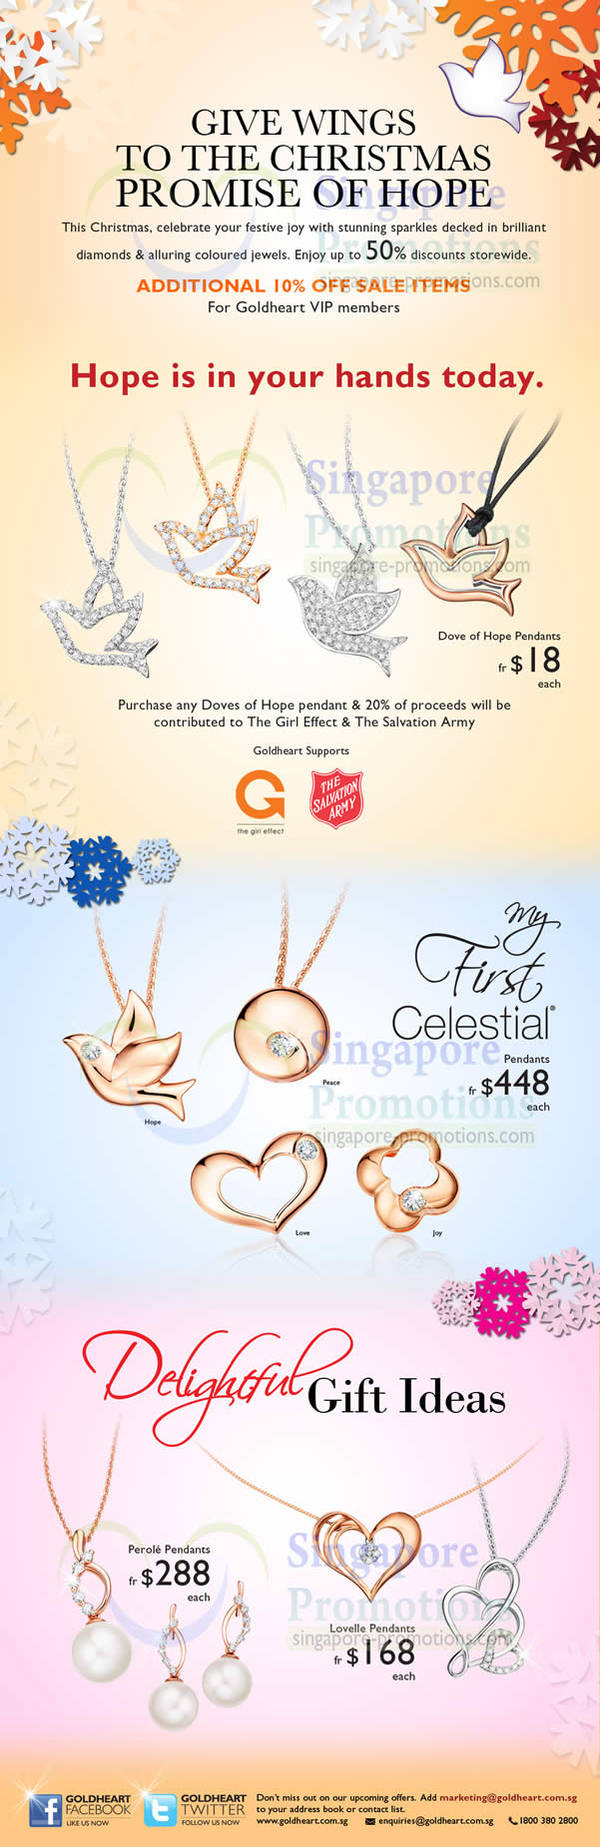 Featured image for (EXPIRED) Goldheart Jewelry Up To 50% Off Storewide Promo 13 Dec 2012